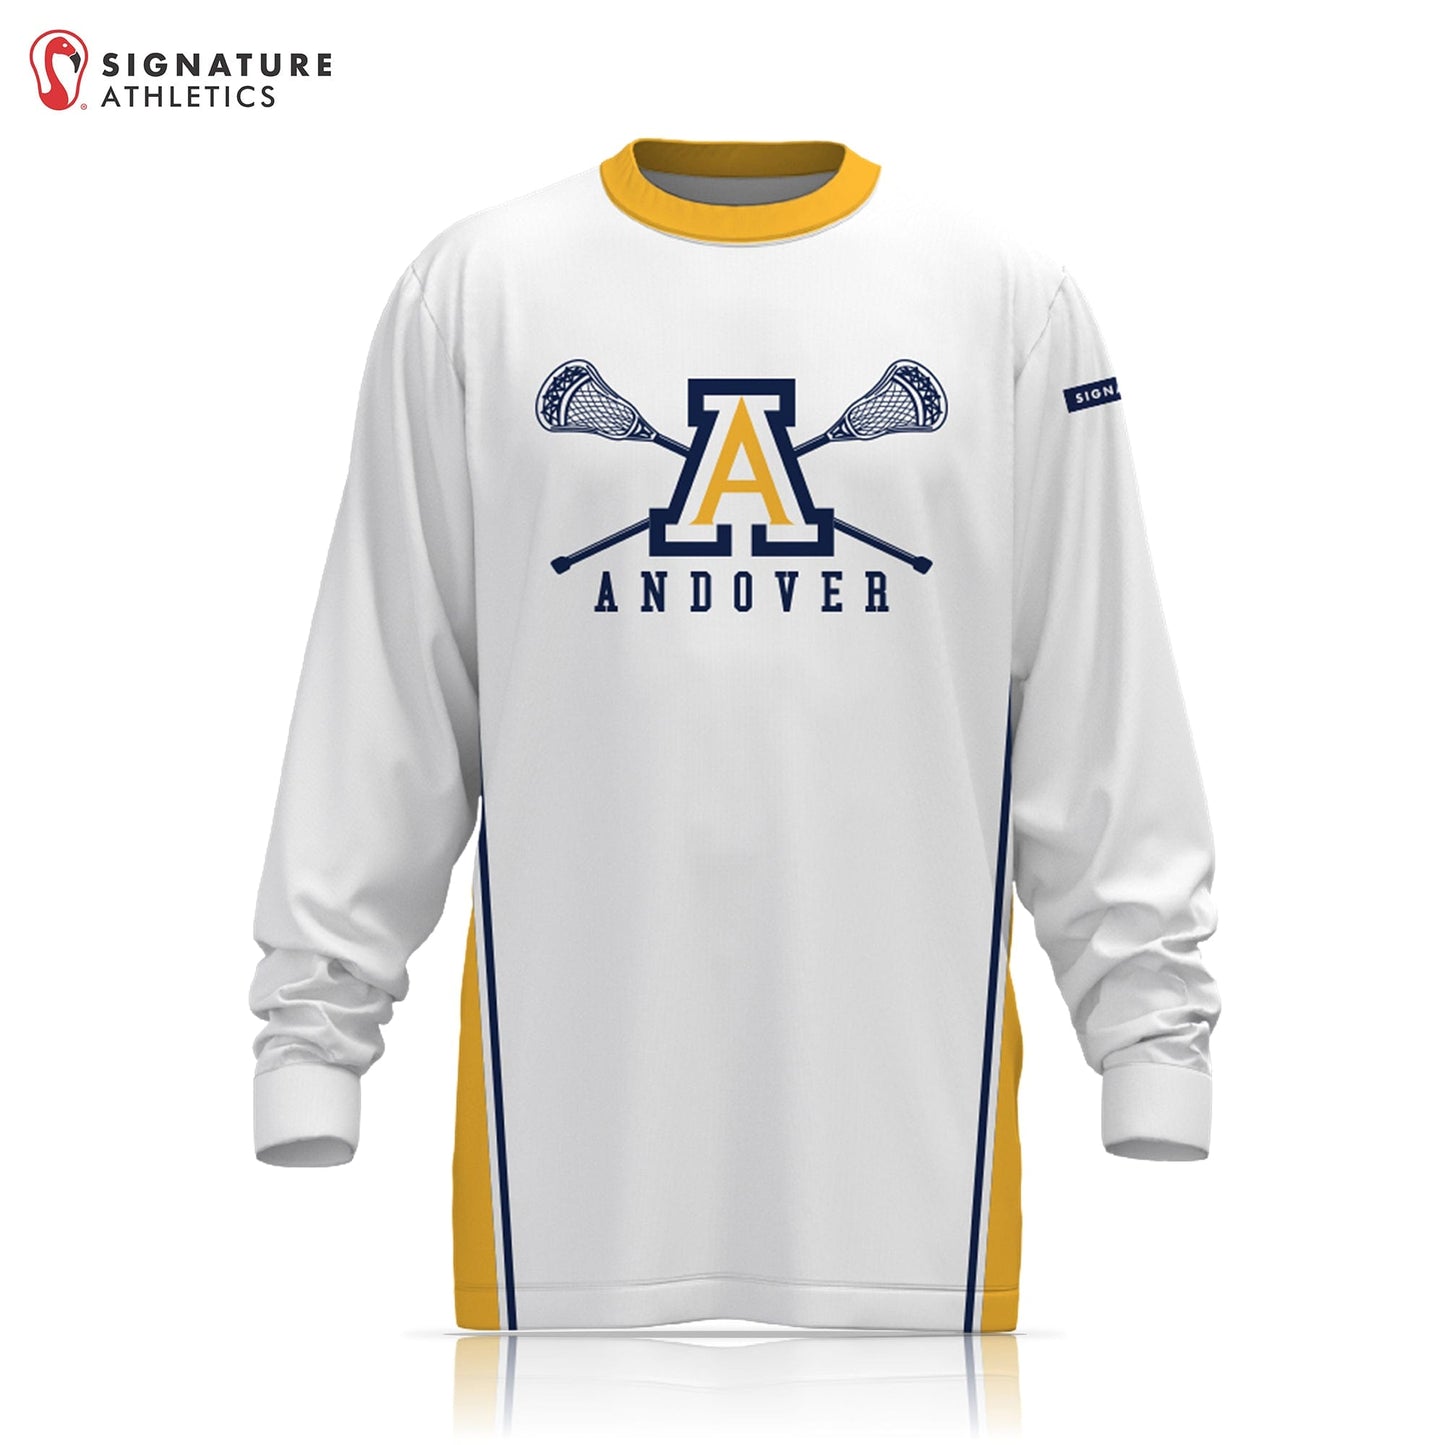 Andover Youth Lacrosse Player Light Long Sleeve Shooting Shirt: 7th Grade Signature Lacrosse